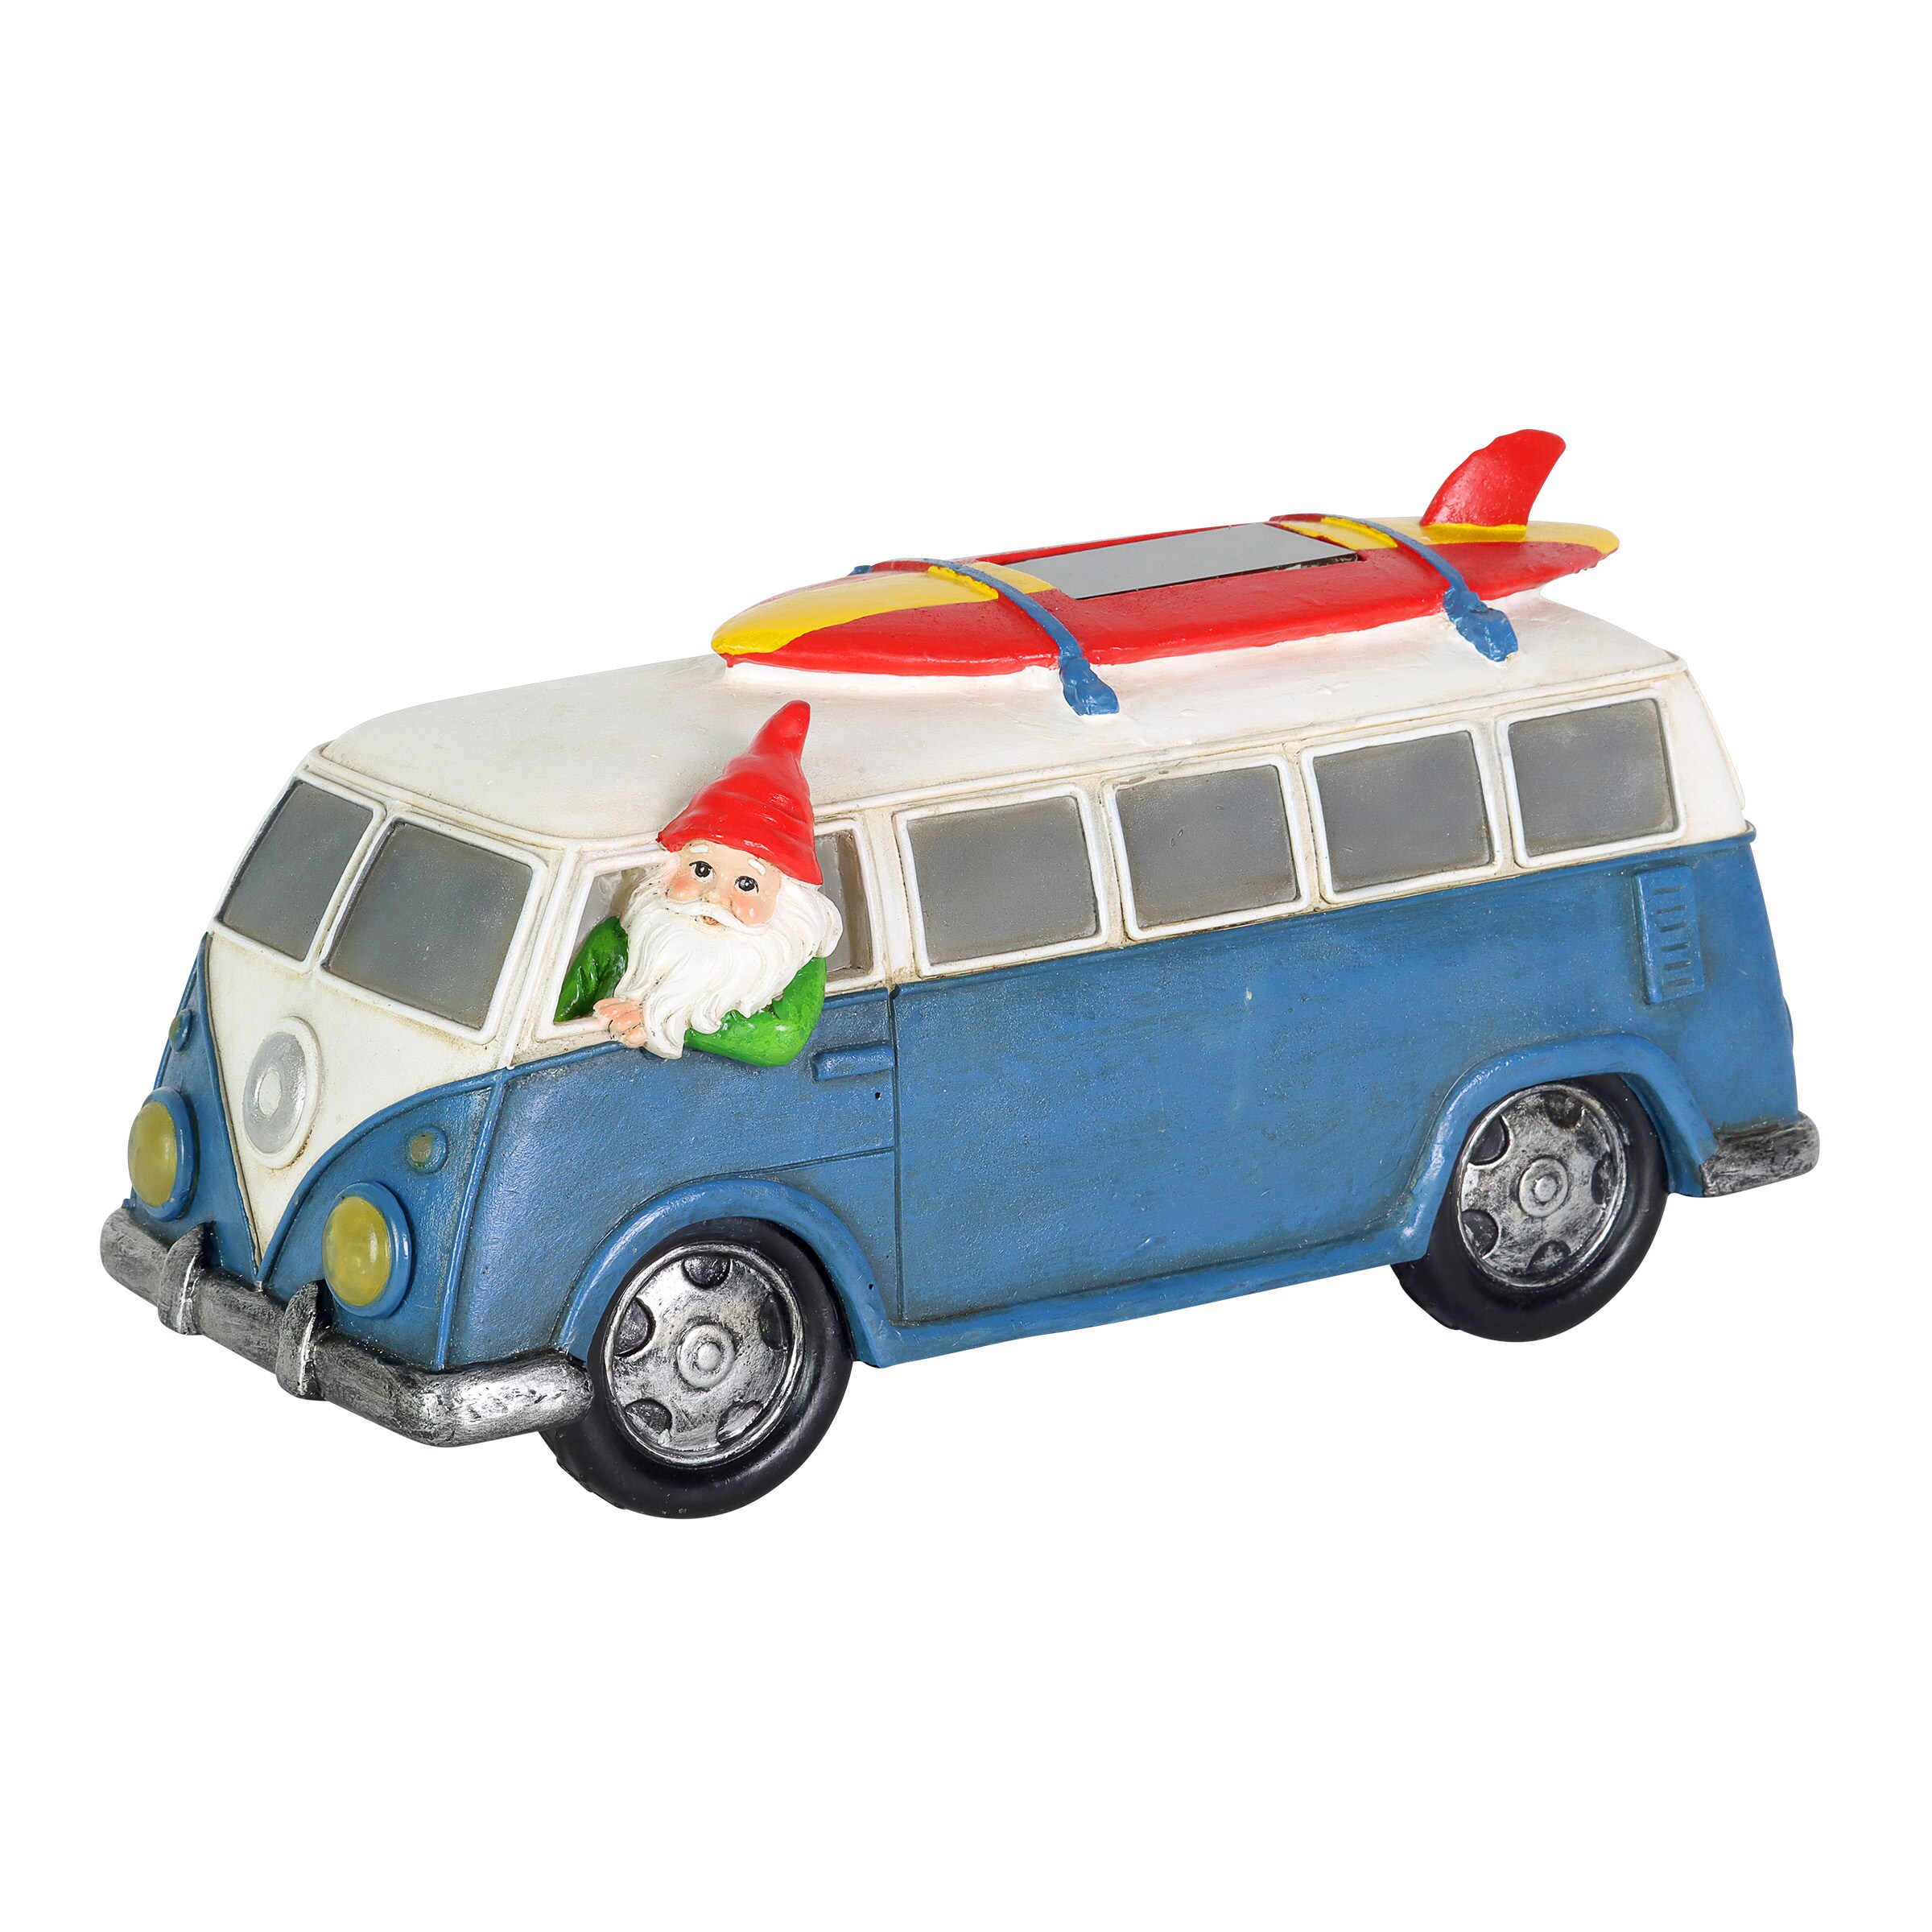 VINTAGE BEACH STYLE HAND DESIGNED METAL TEAL SURF BUS WITH SURFBOARDS ON TOP!! 